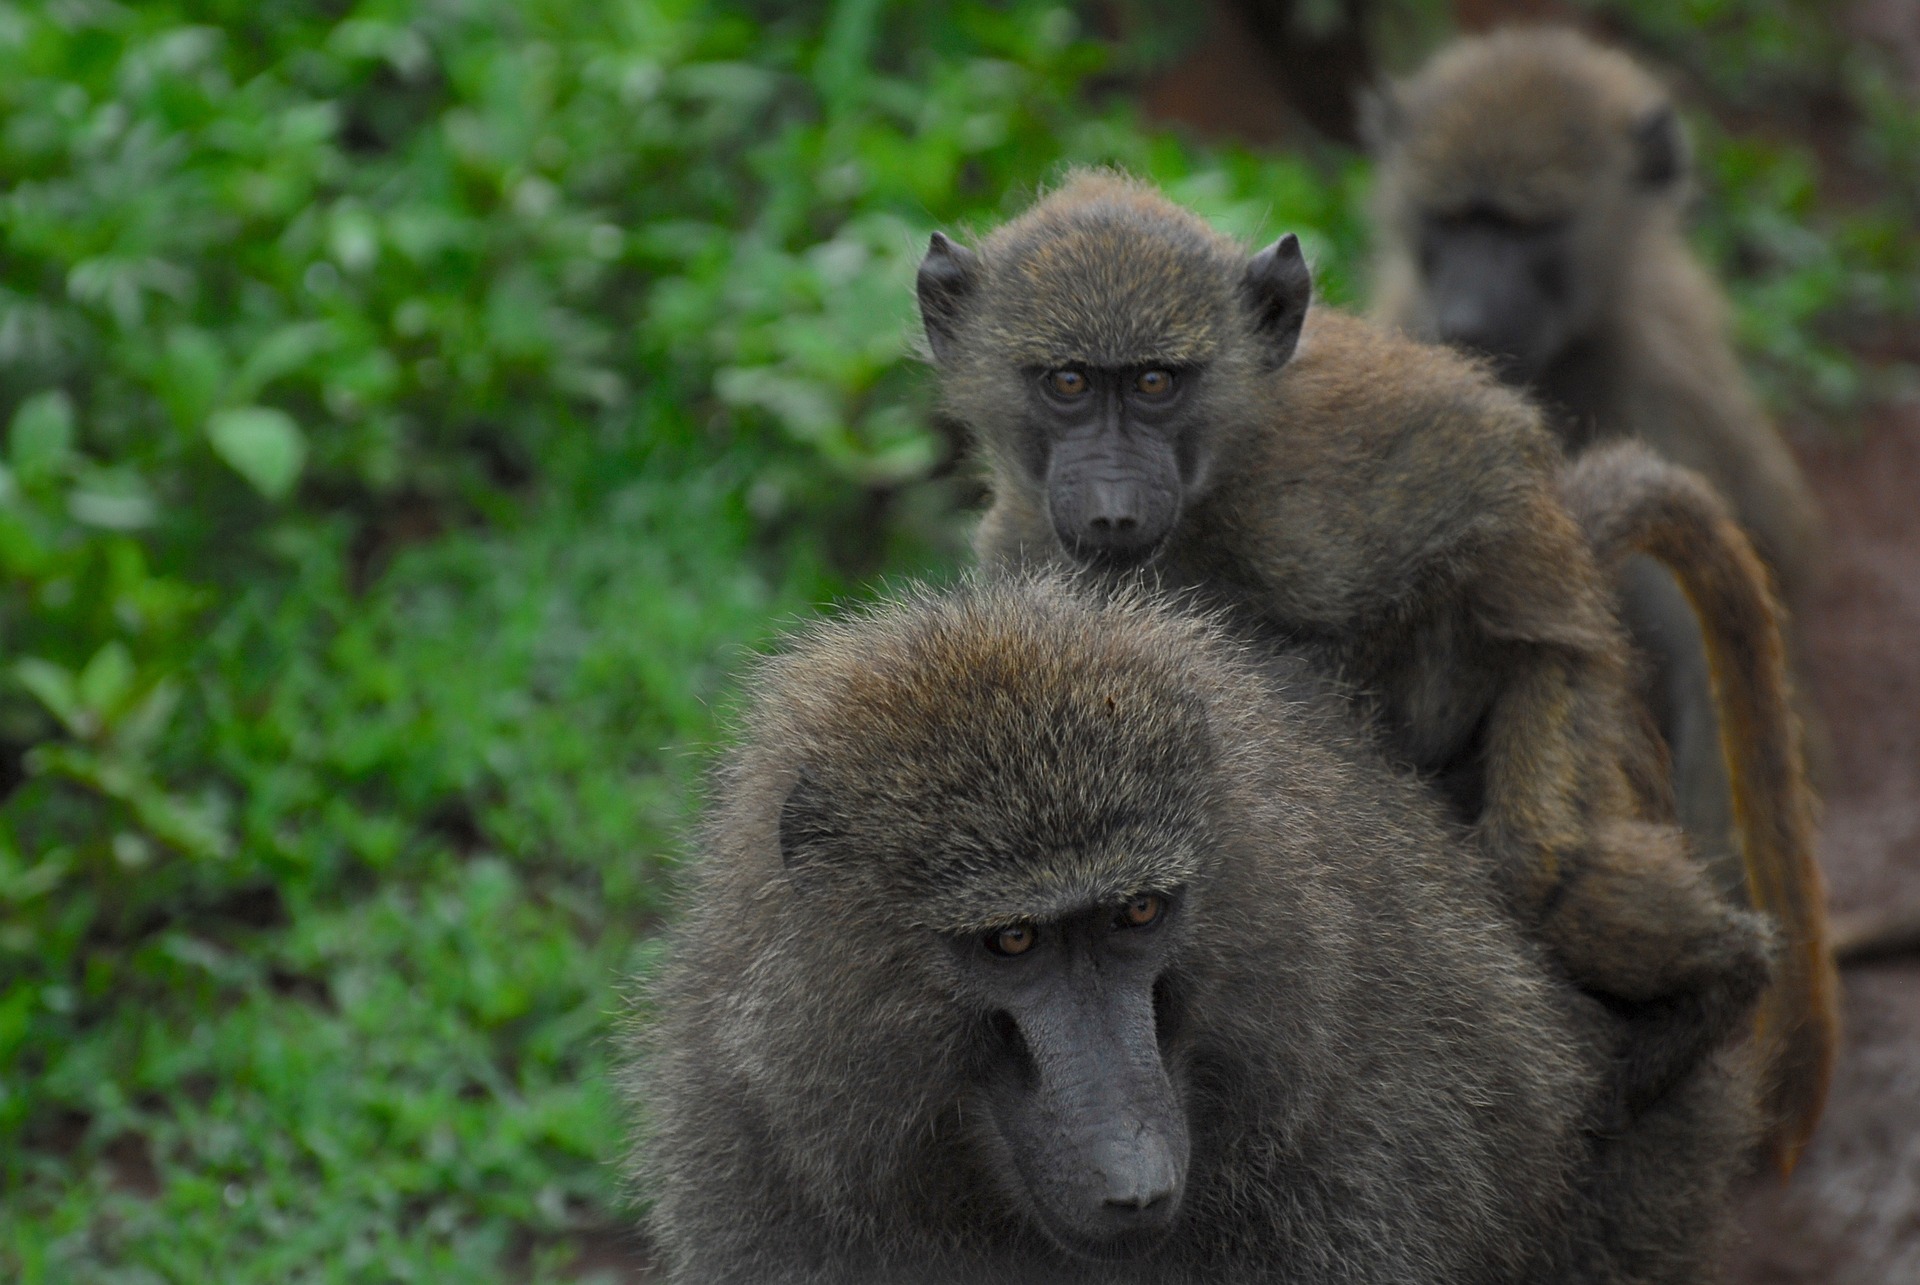 A group of three baboons in the wild